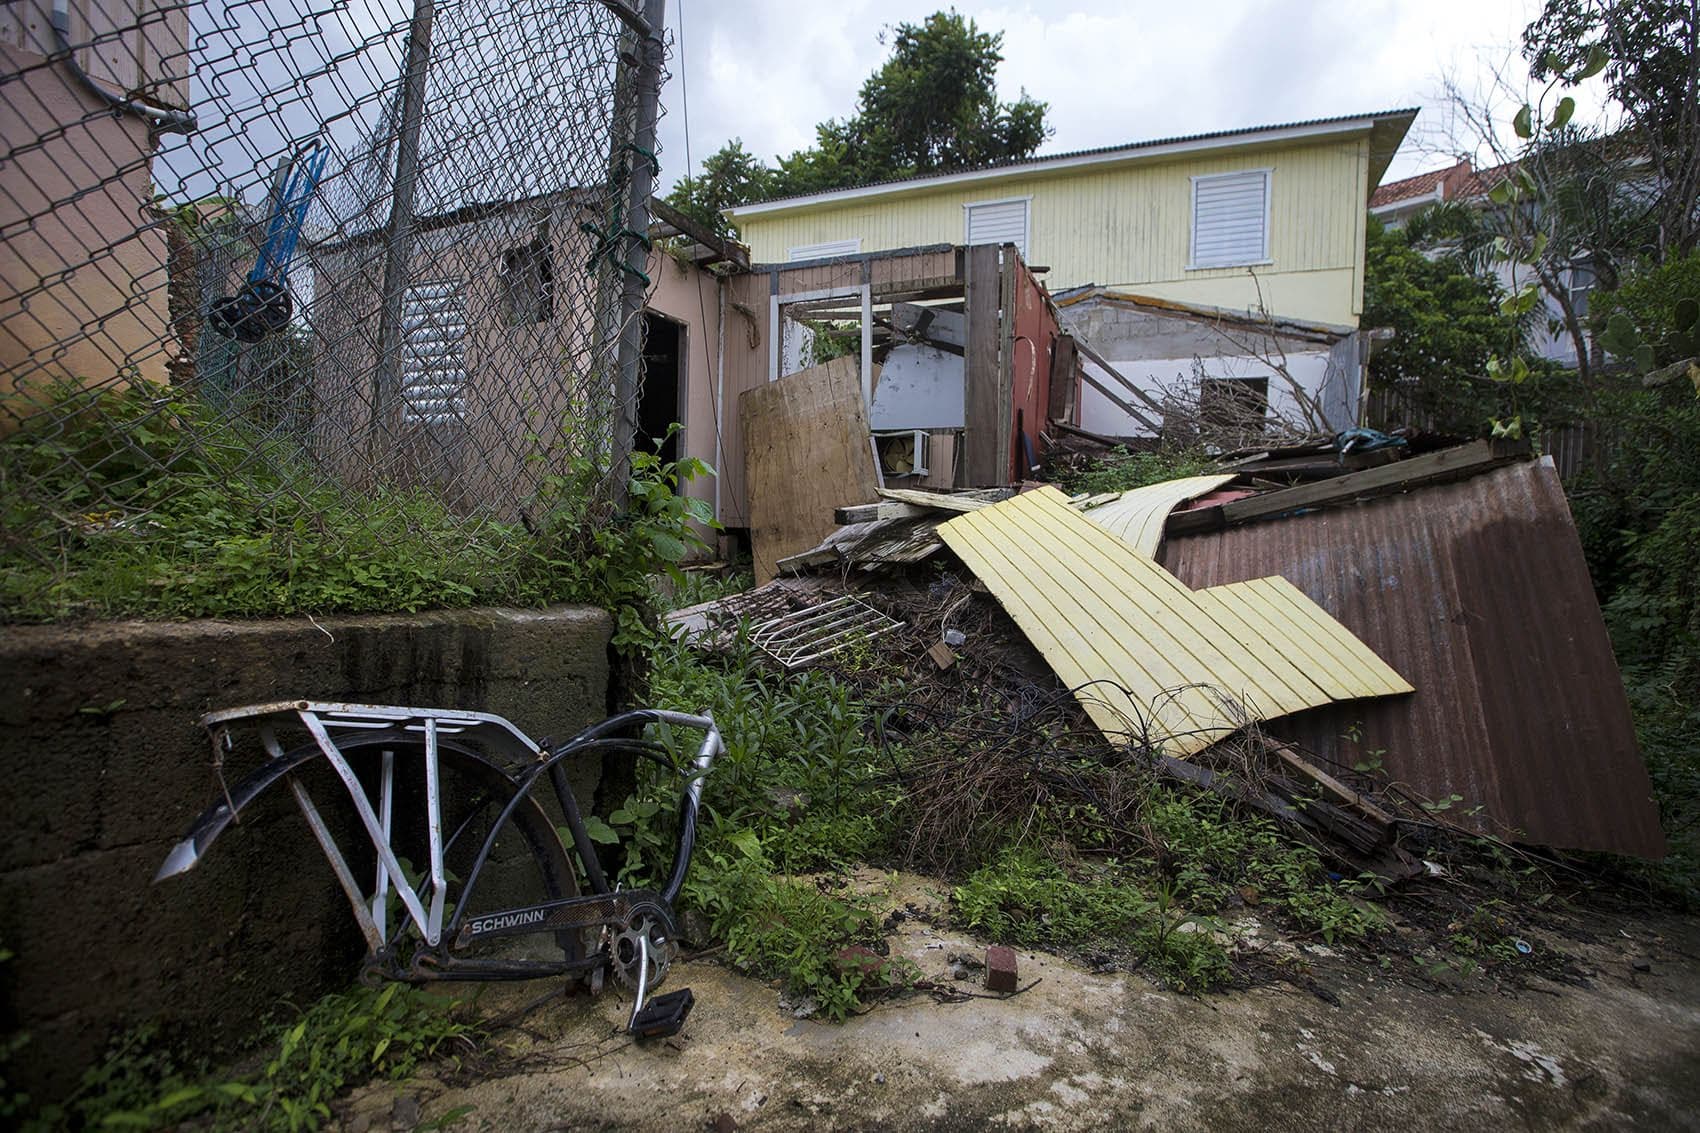 A house in Guaynabo, which was completely leveled by Hurricane Maria, still sits in ruin one year after the storm. (Jesse Costa/WBUR)